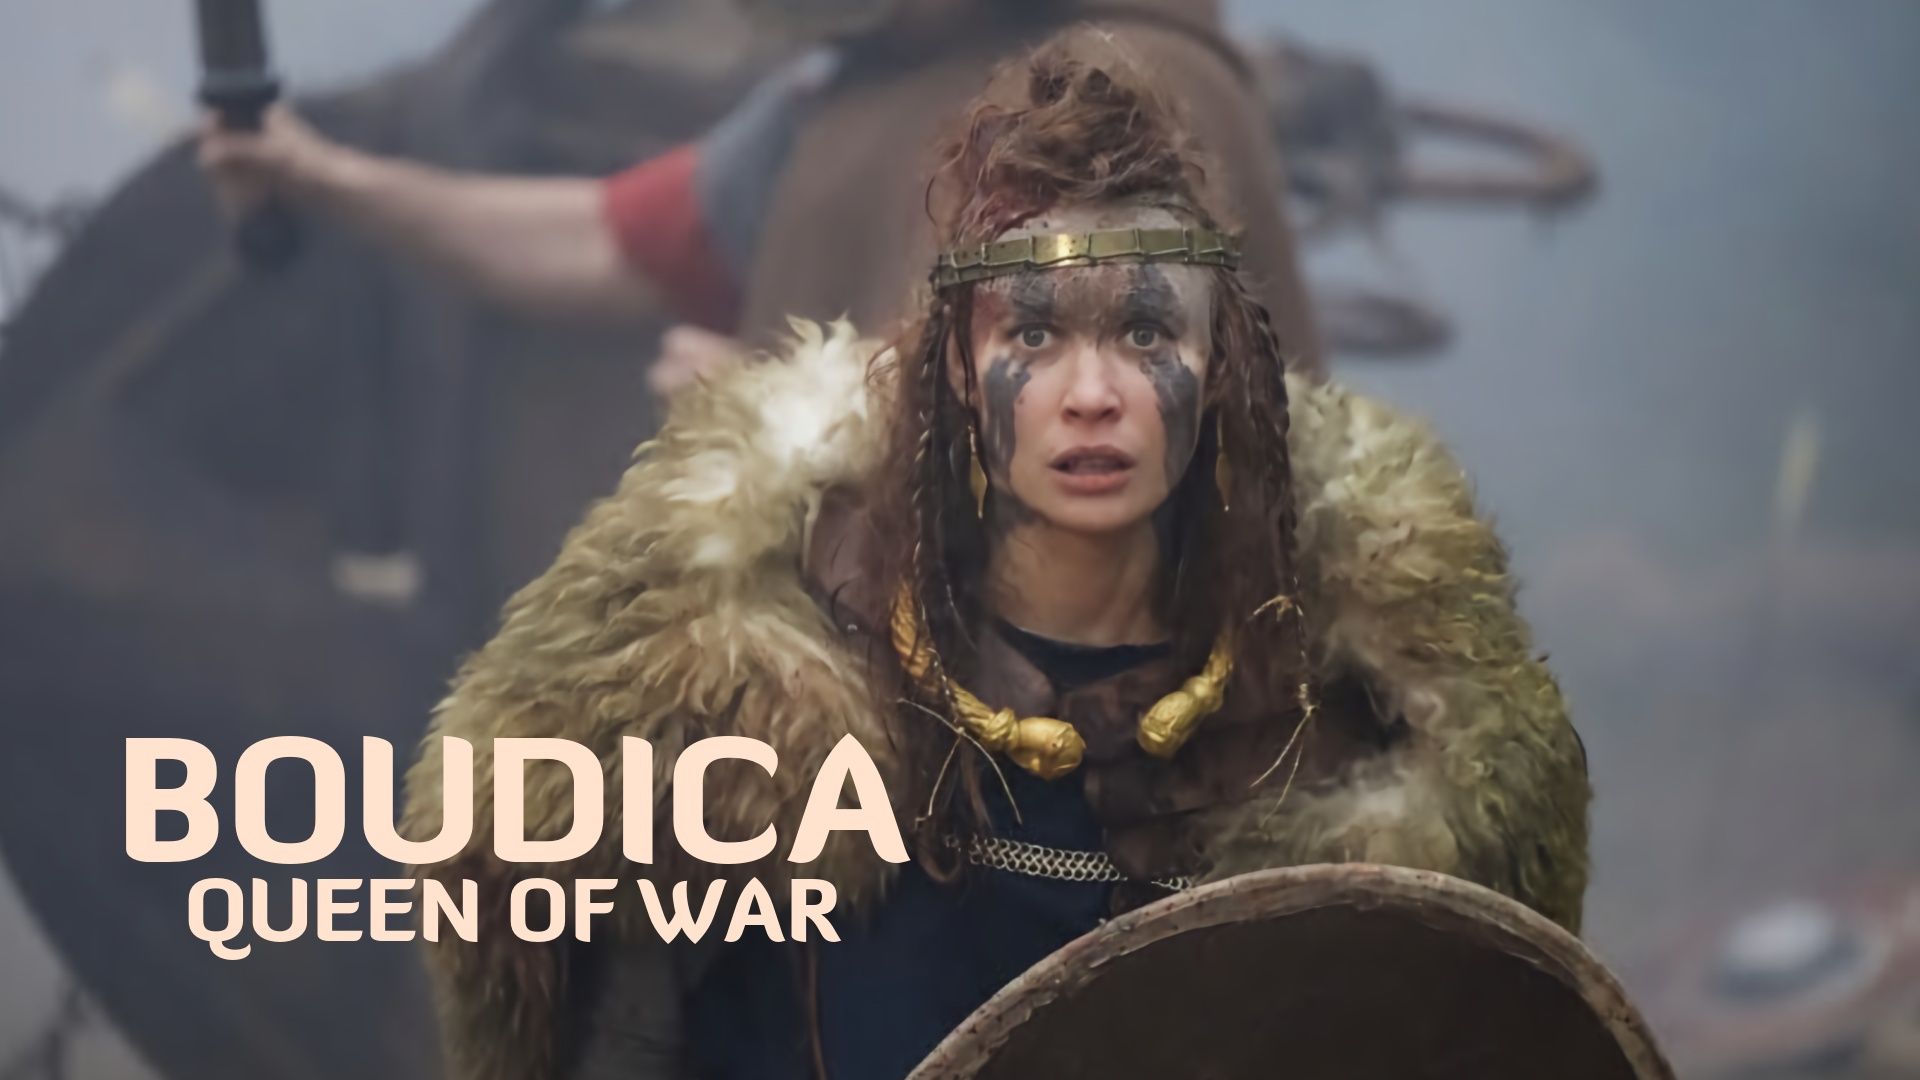 Boudica Queen of War (2023) Release Date is November 2, 2023 See the